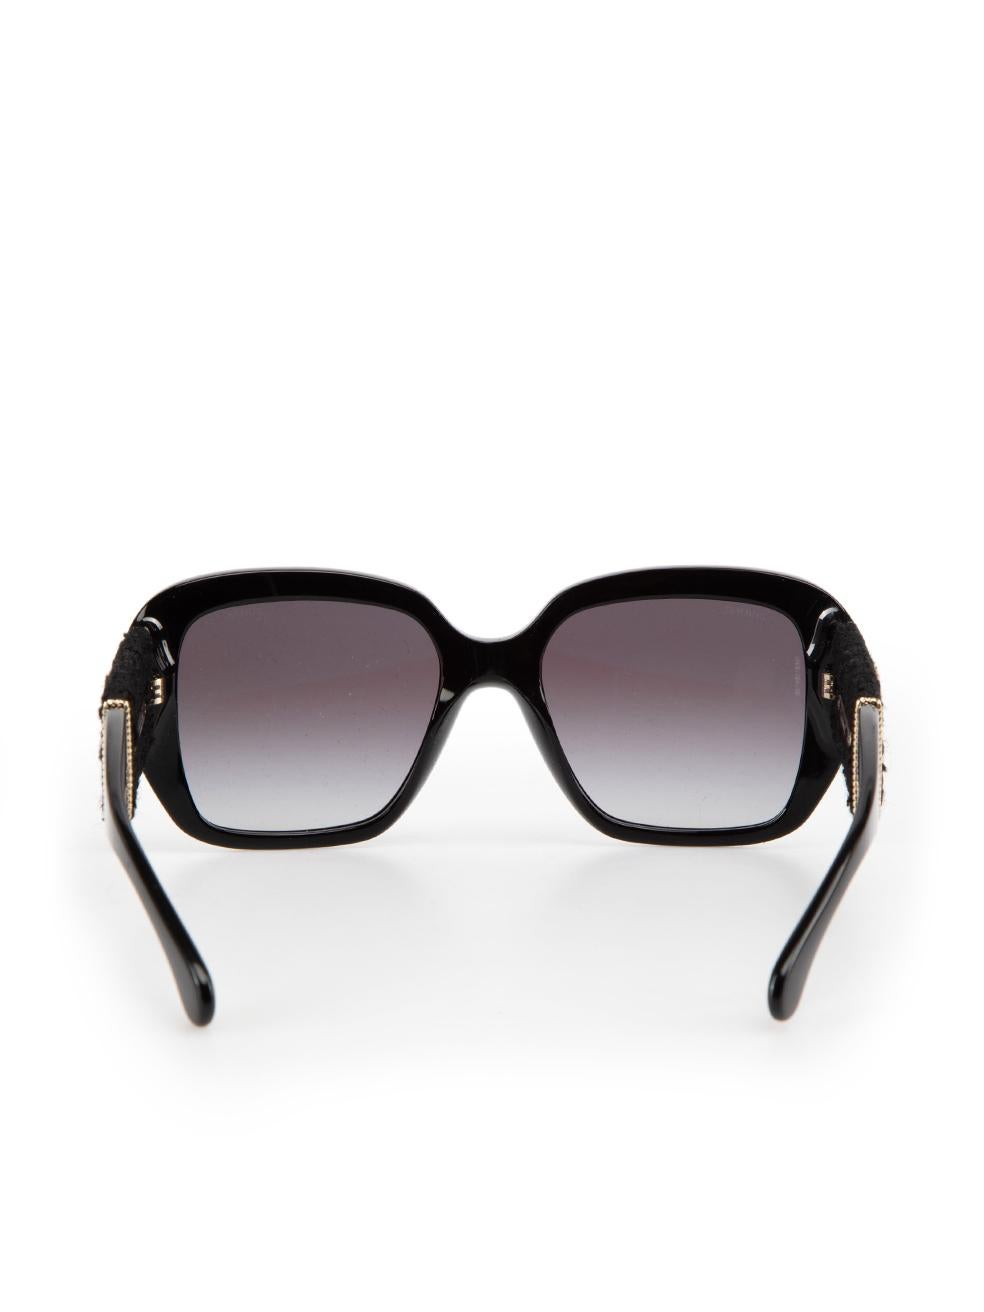 Women's Chanel Black Square Tweed Arms Sunglasses